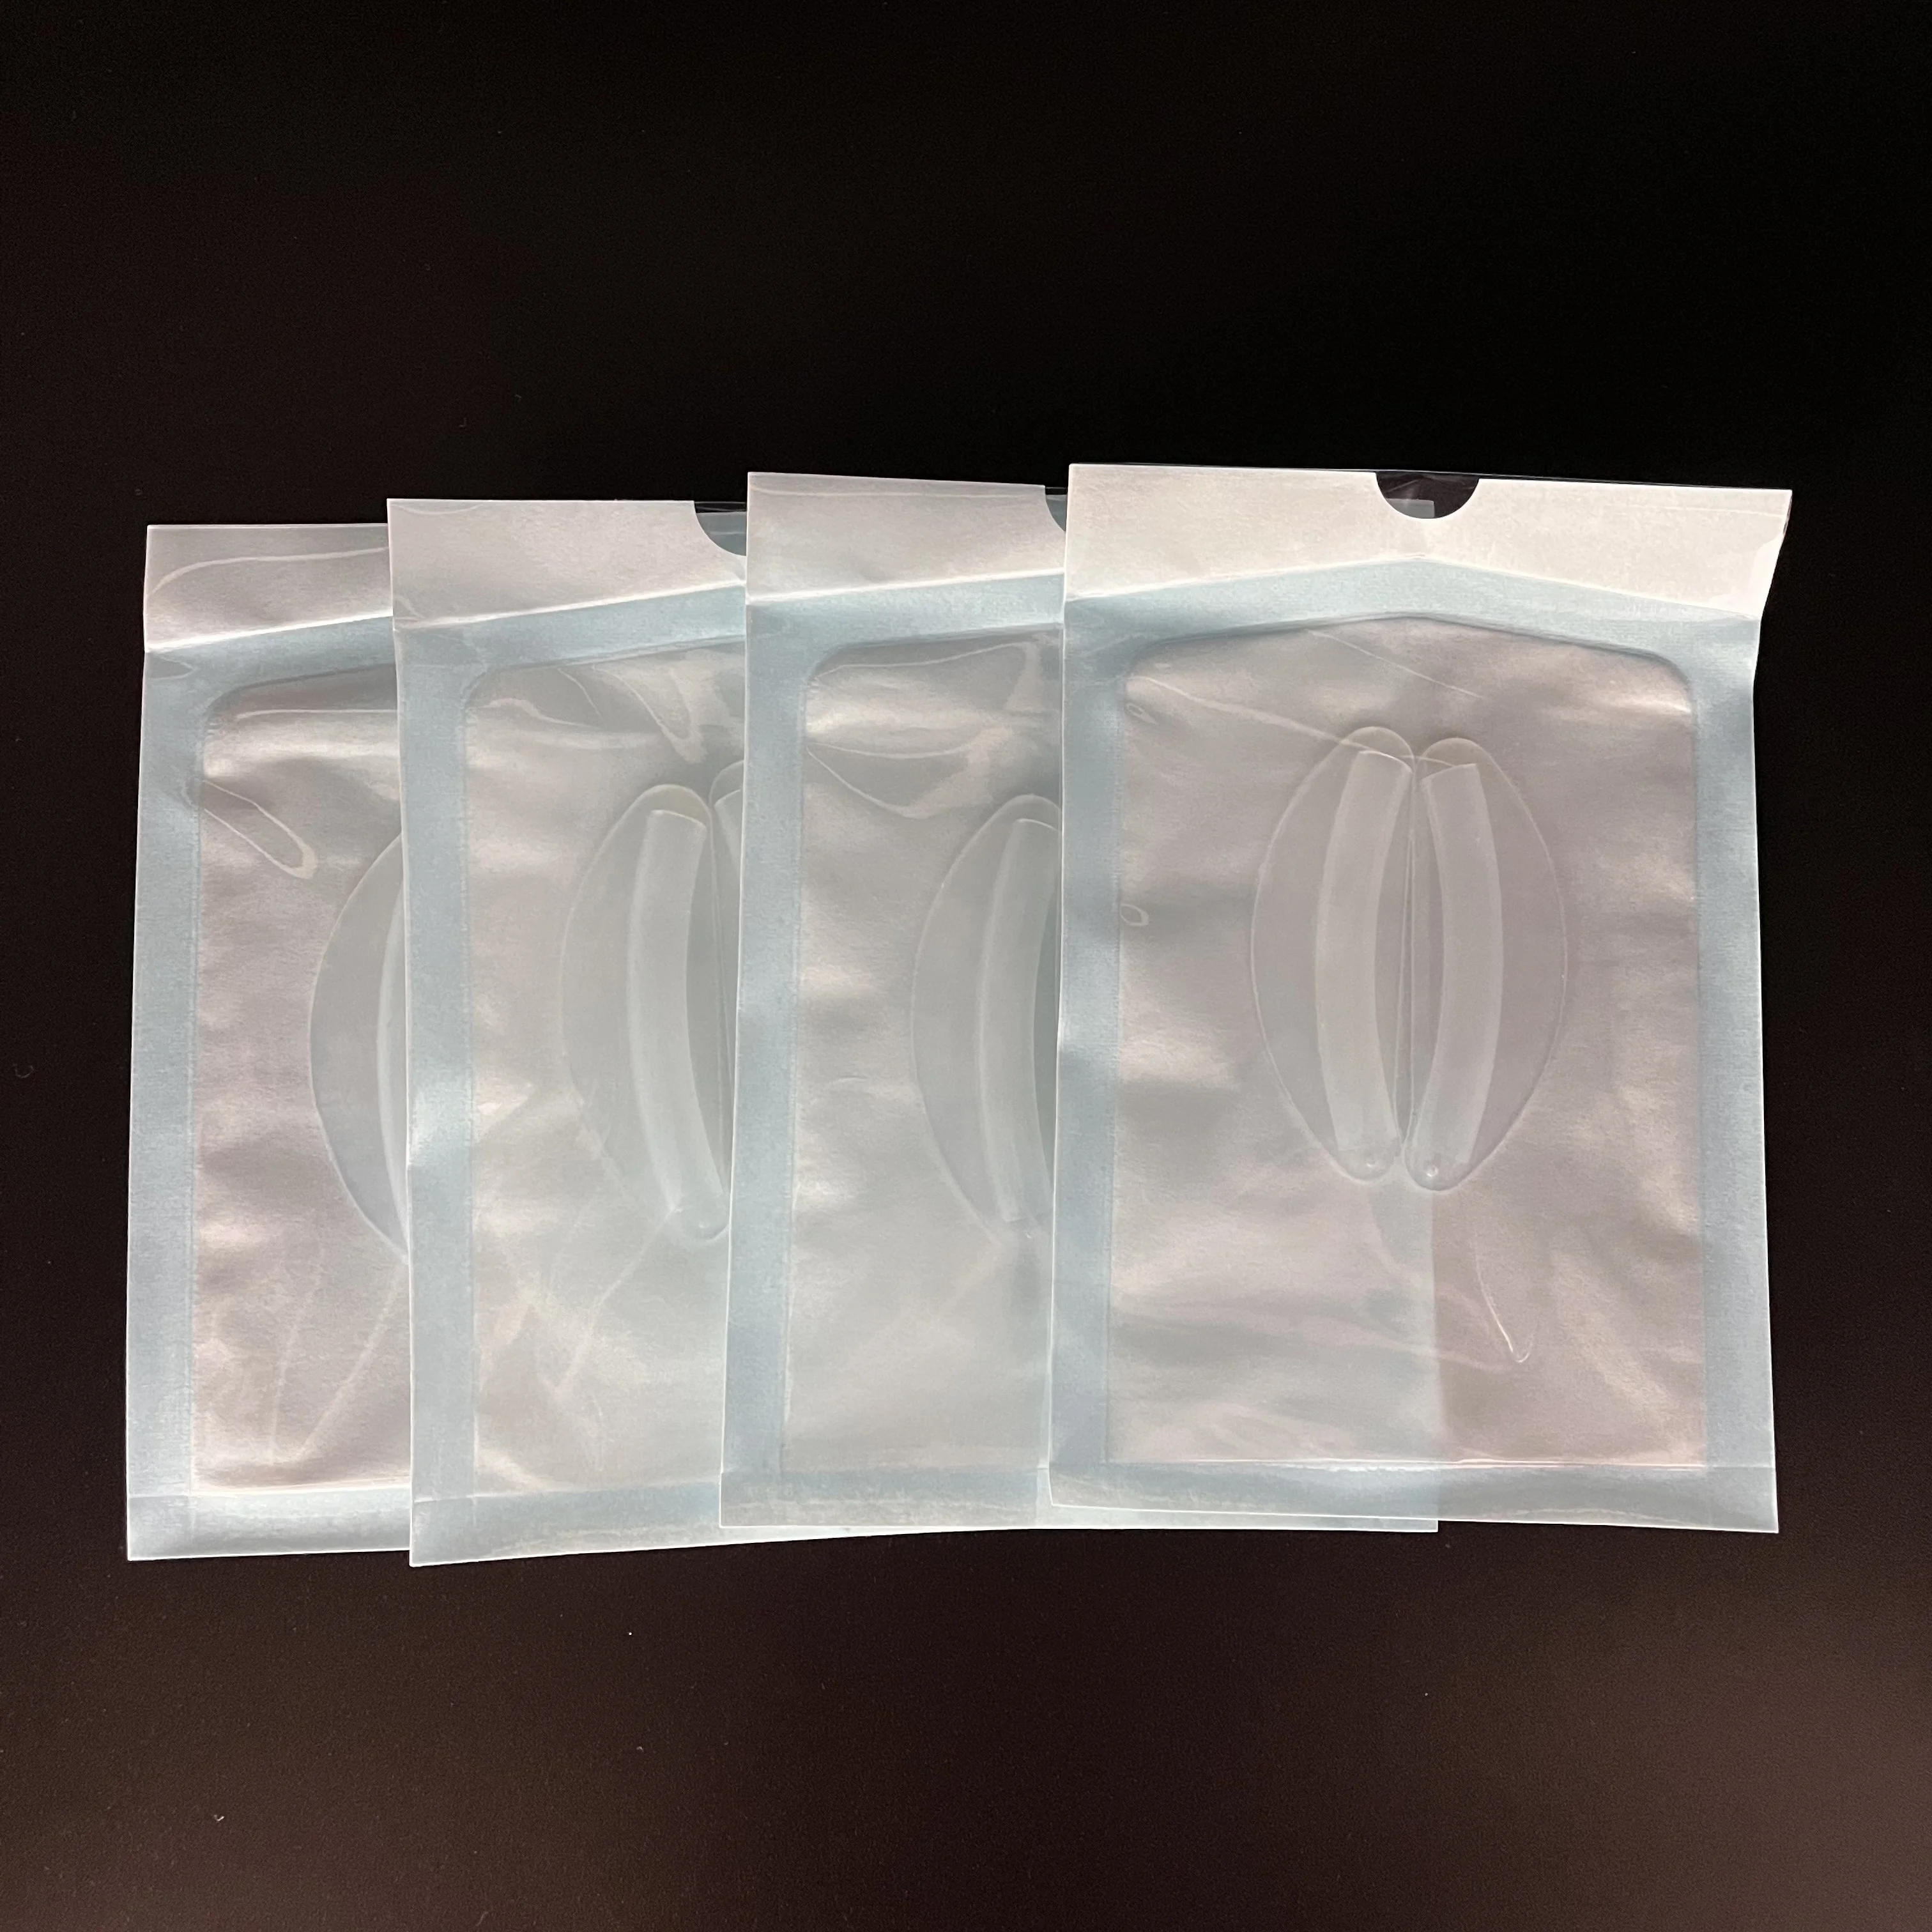 Imported medical-grade silicone splint for nasal support ,used in hospital nasal splint2022